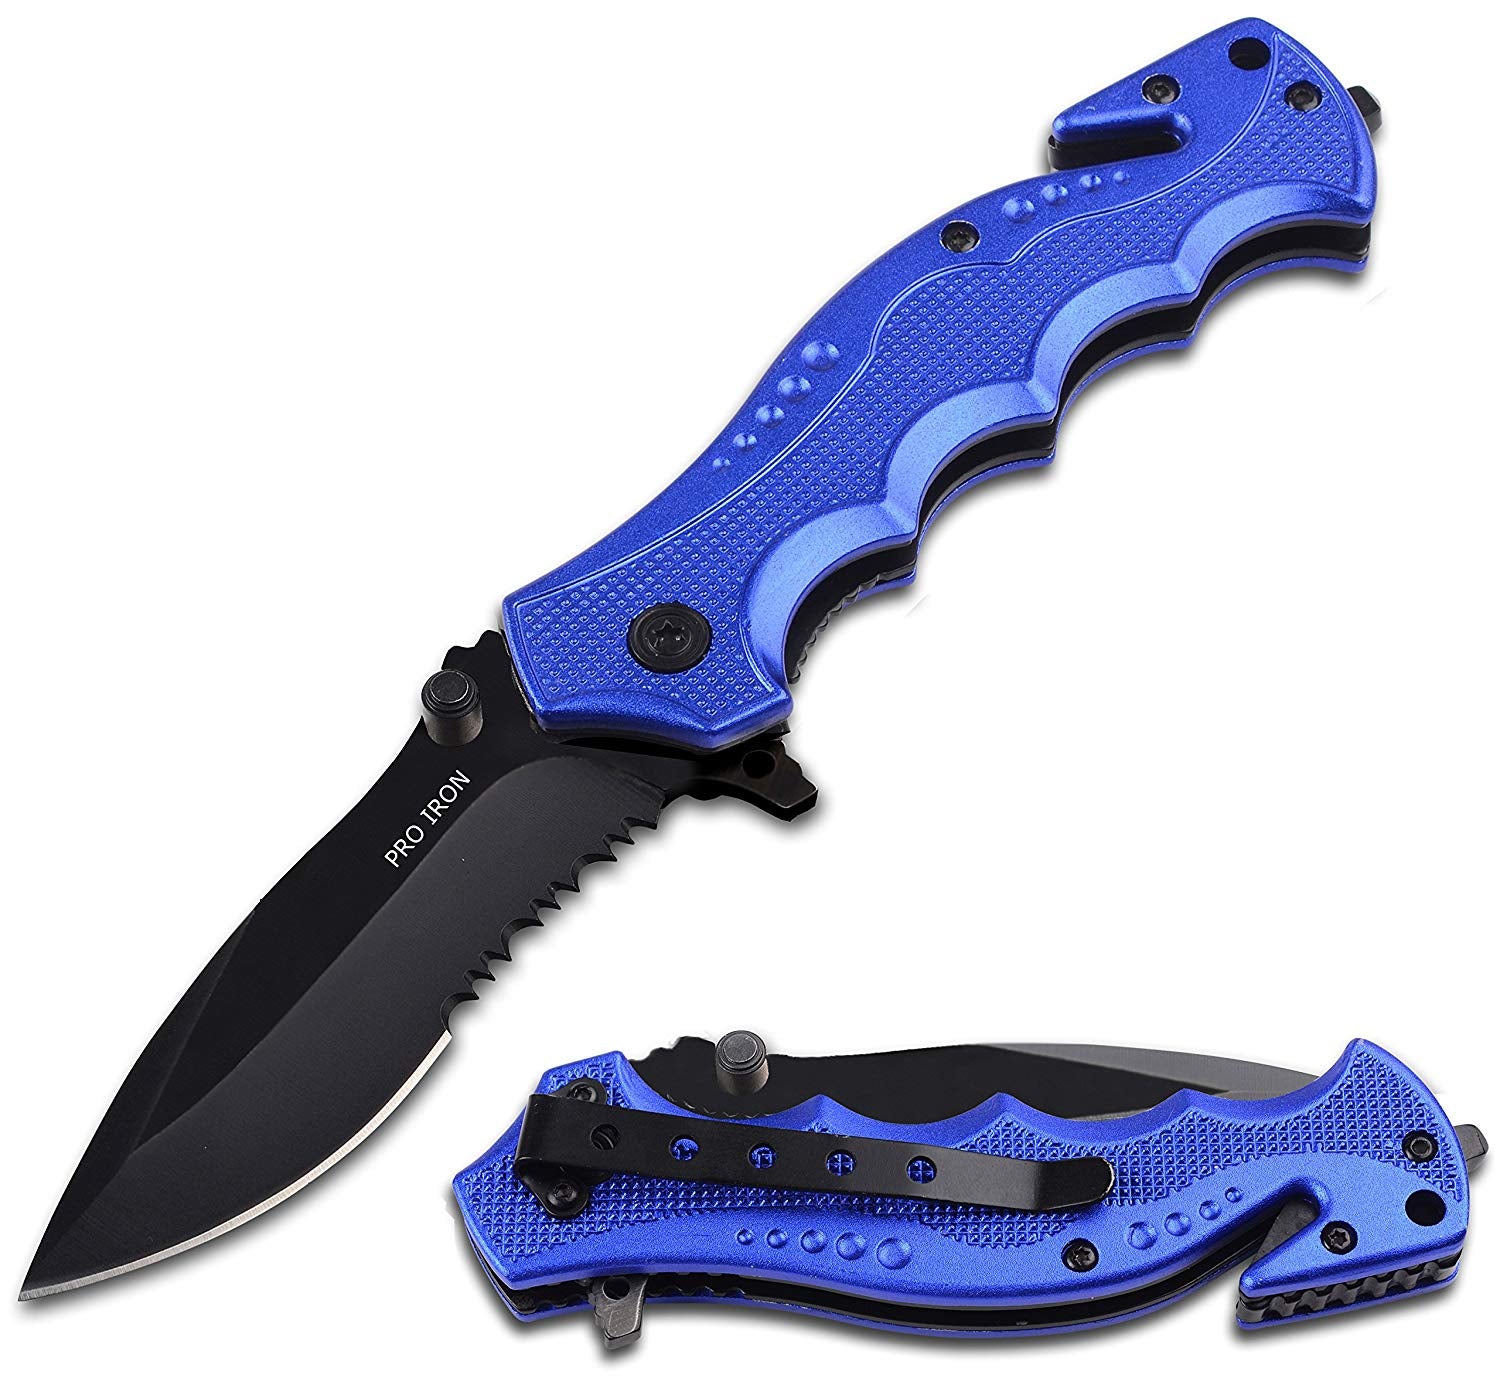 Serrated Edge Outdoor Survival Camping Hunting Knife - 2 Knives - Blue